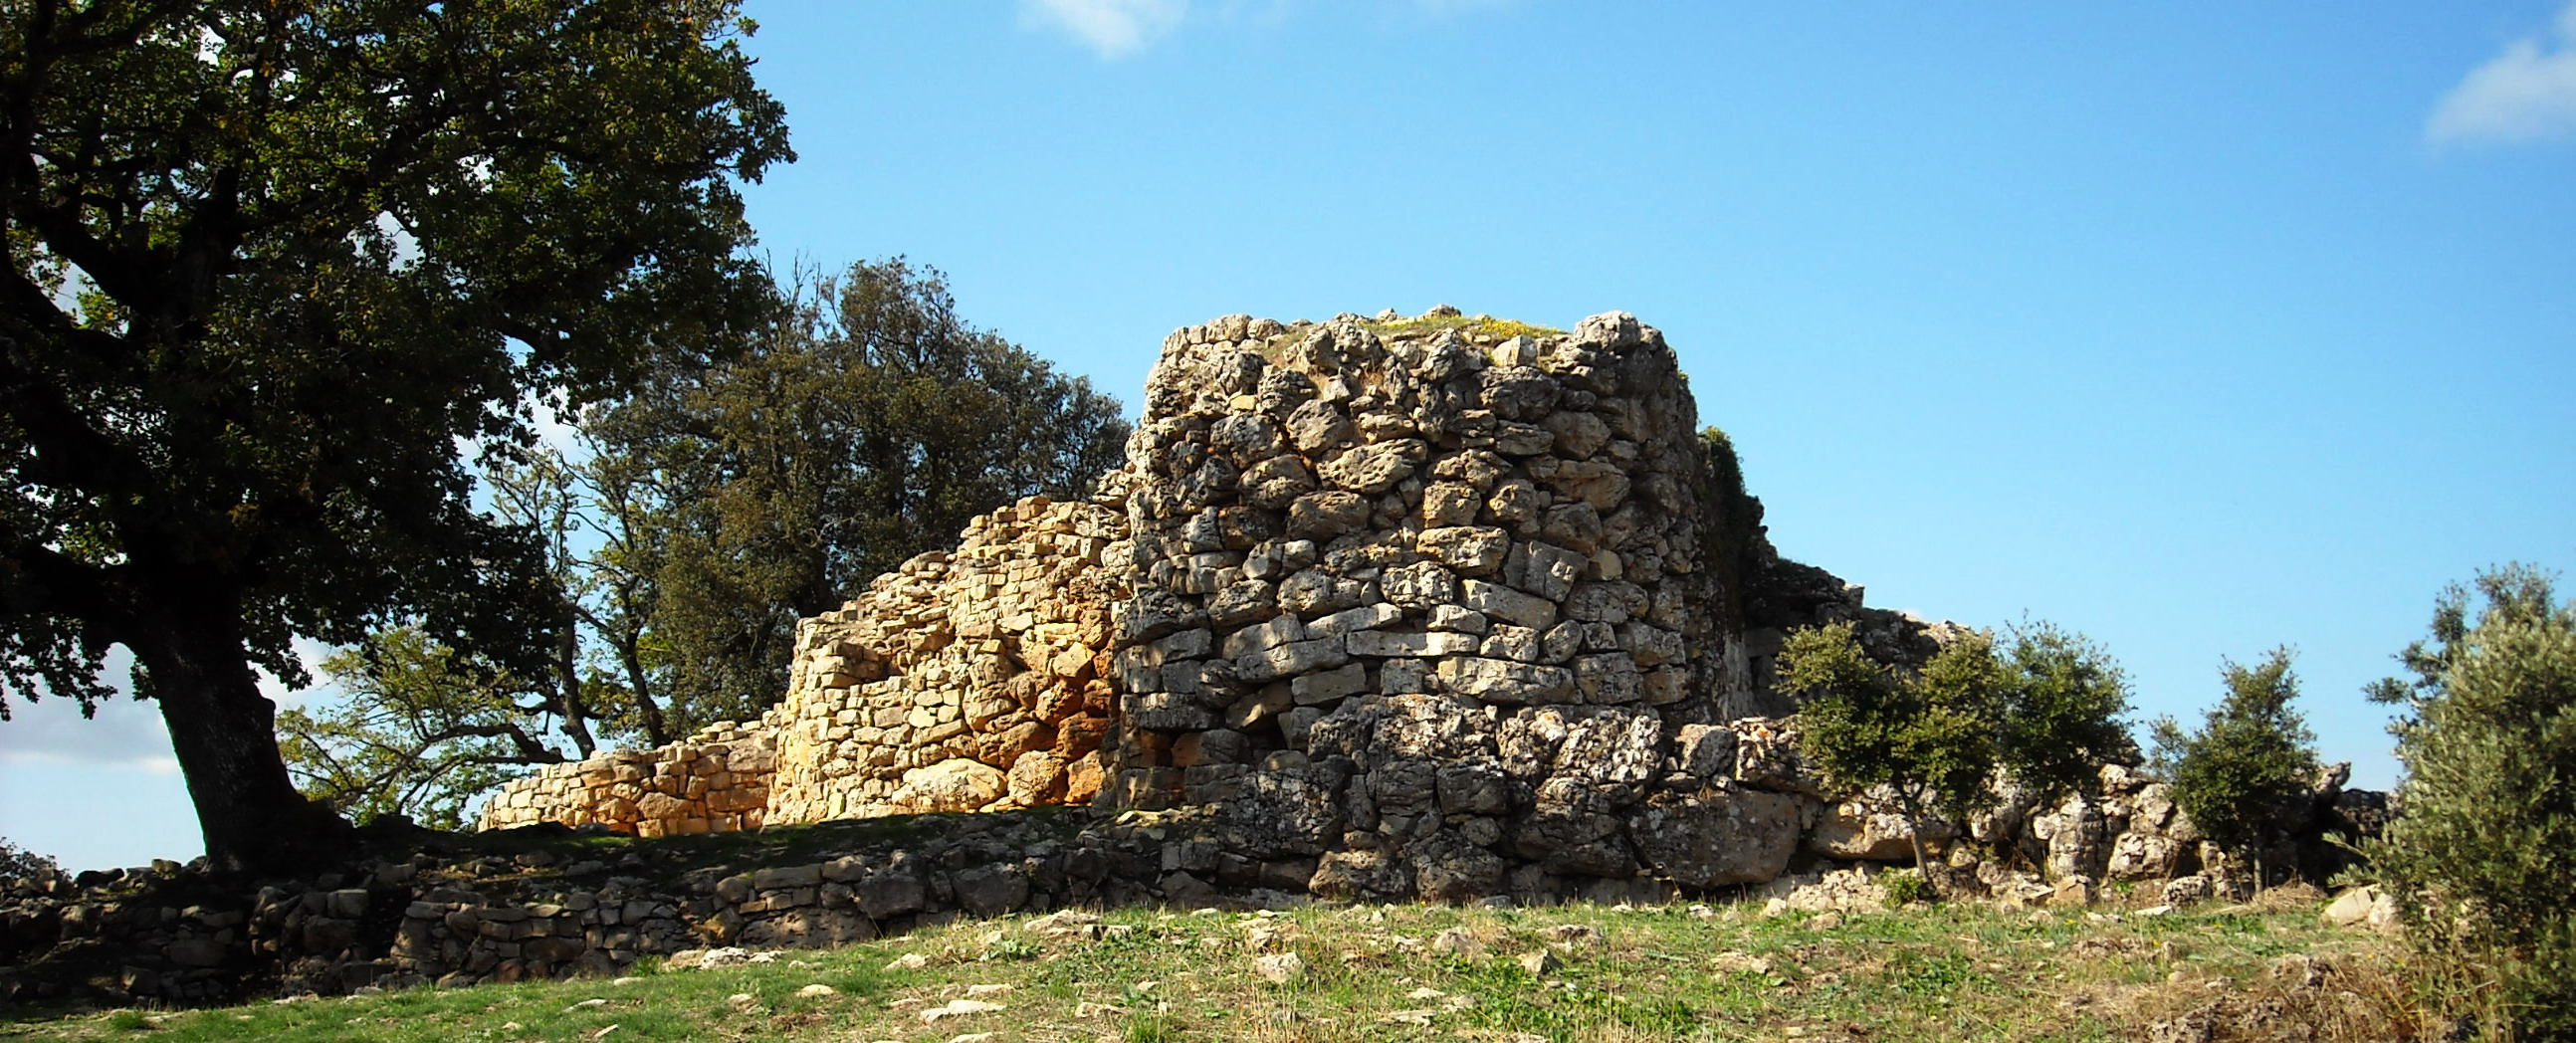 a stone structure on a hill with trees around it